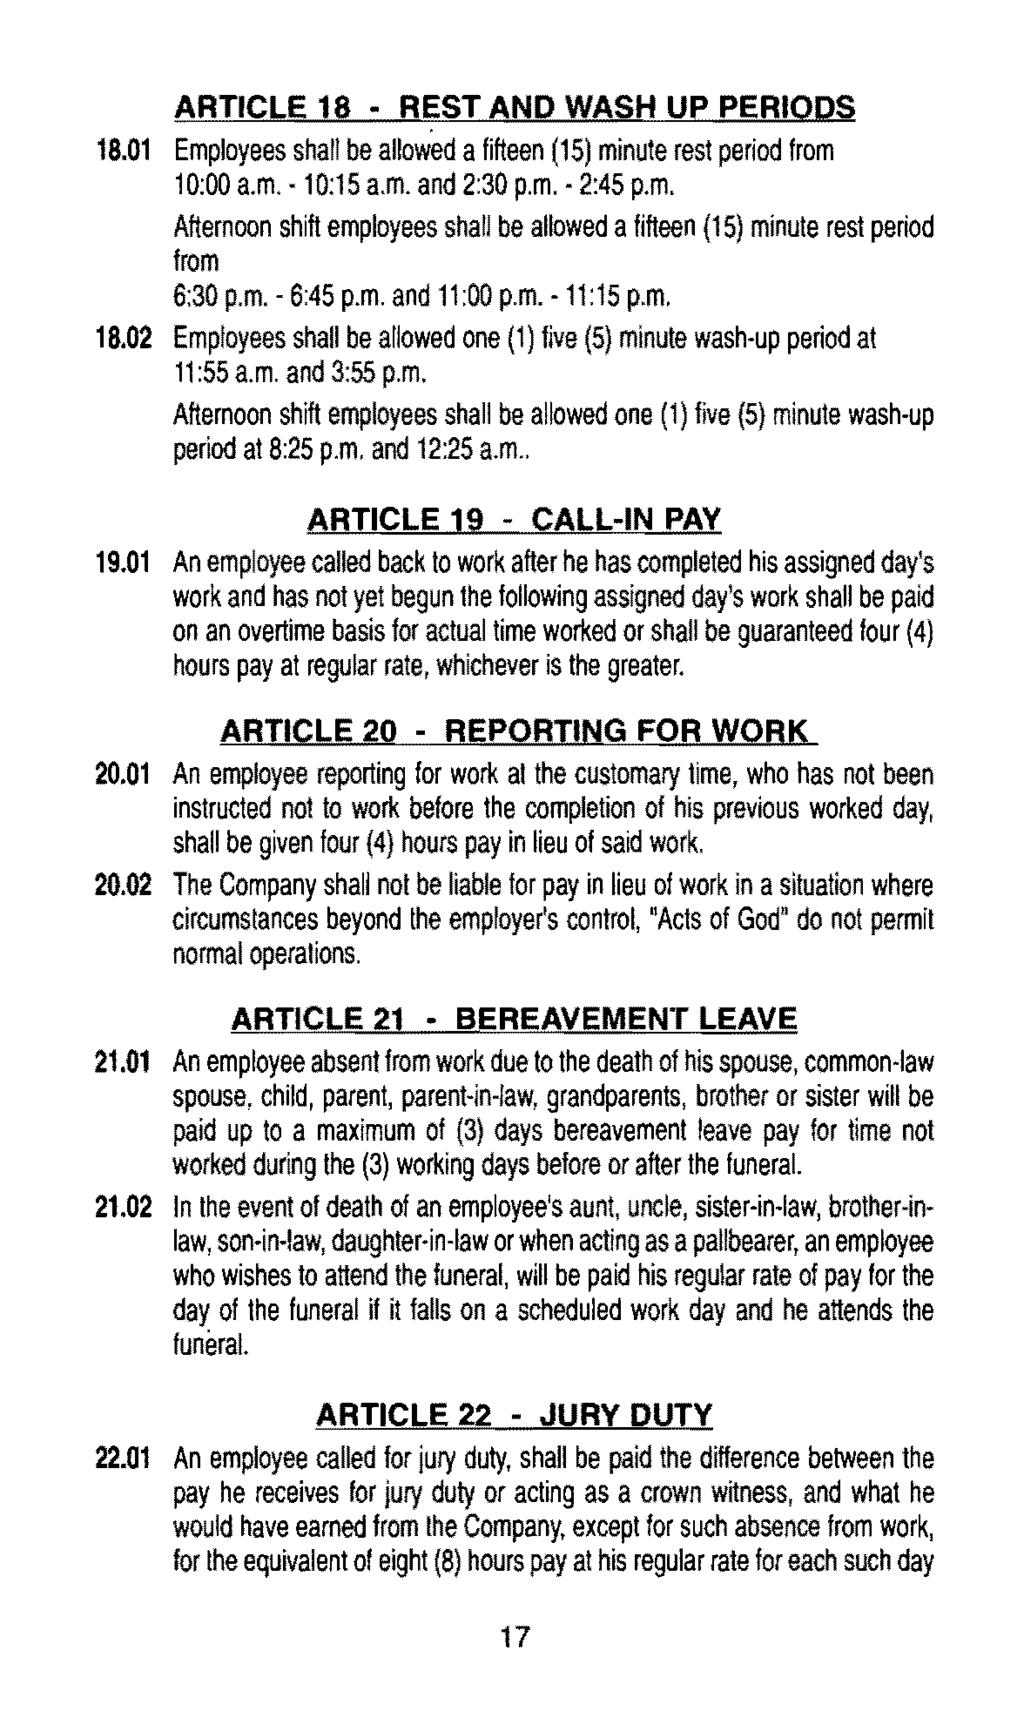 ARTICLE 18 REST AND WASH UP PERIODS 18.01 Employees shall be allowed a fifteen (15) minute rest period from 10:00 a.m. 10:15 a.m. and 2:30p.m. 2:45p.m. Afternoon shift employees shall be allowed a fifteen (15) minute rest period from 6:30p.